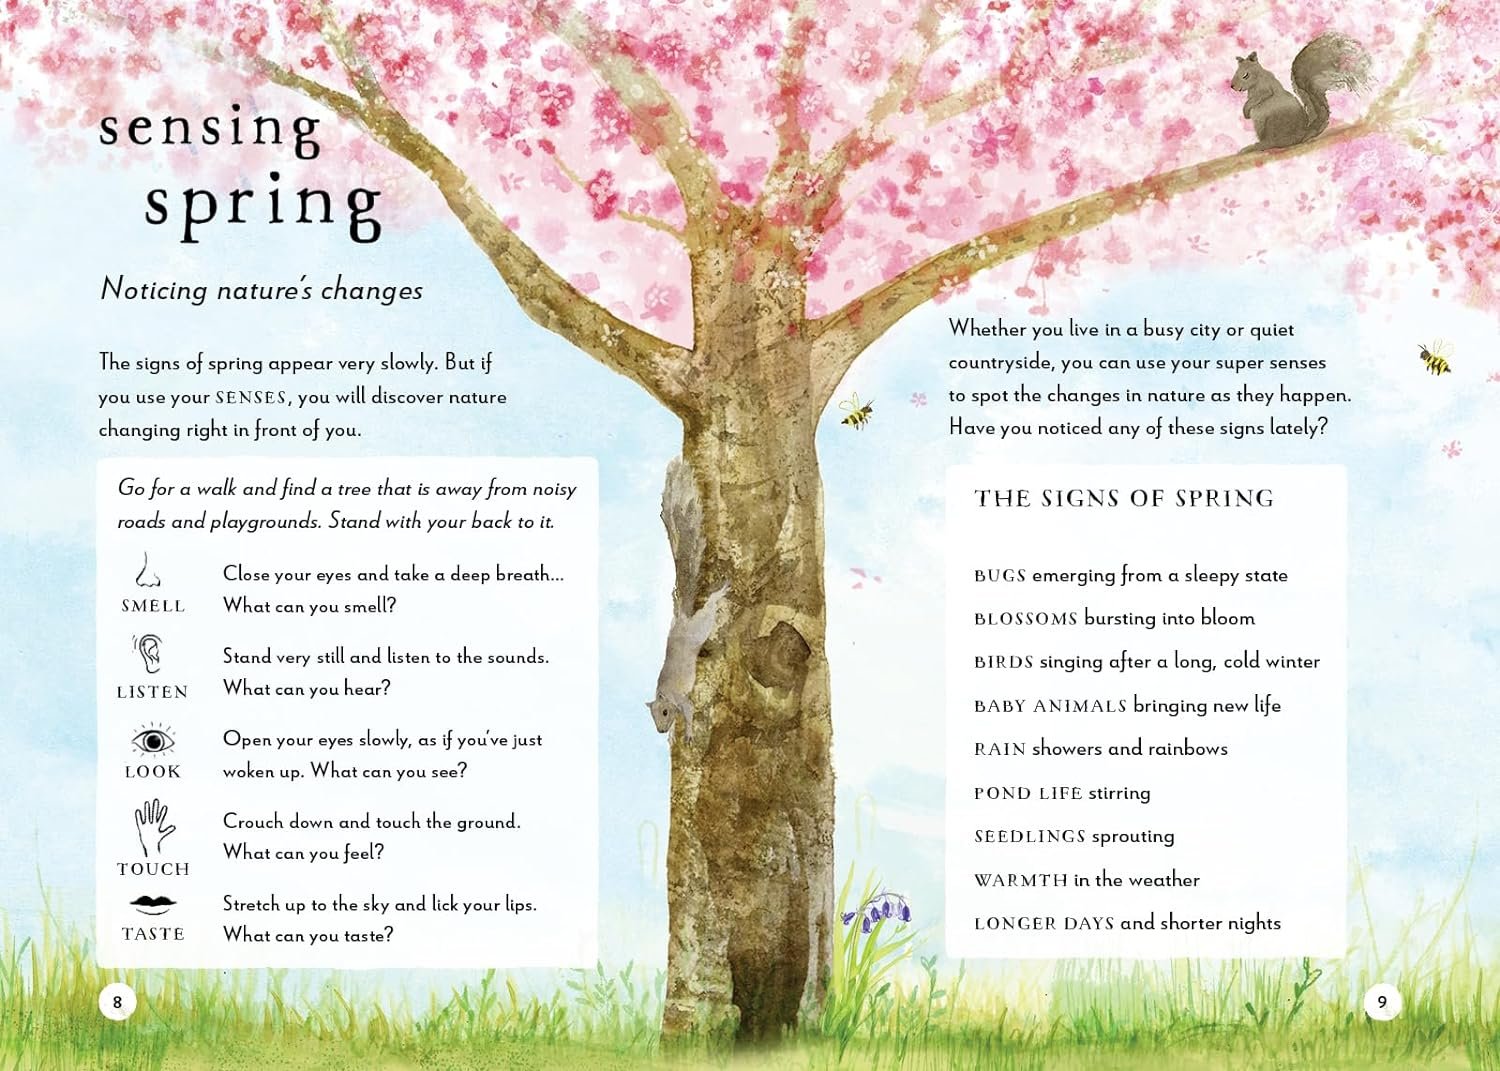 A Field Guide to Spring_excerpt 3.jpg